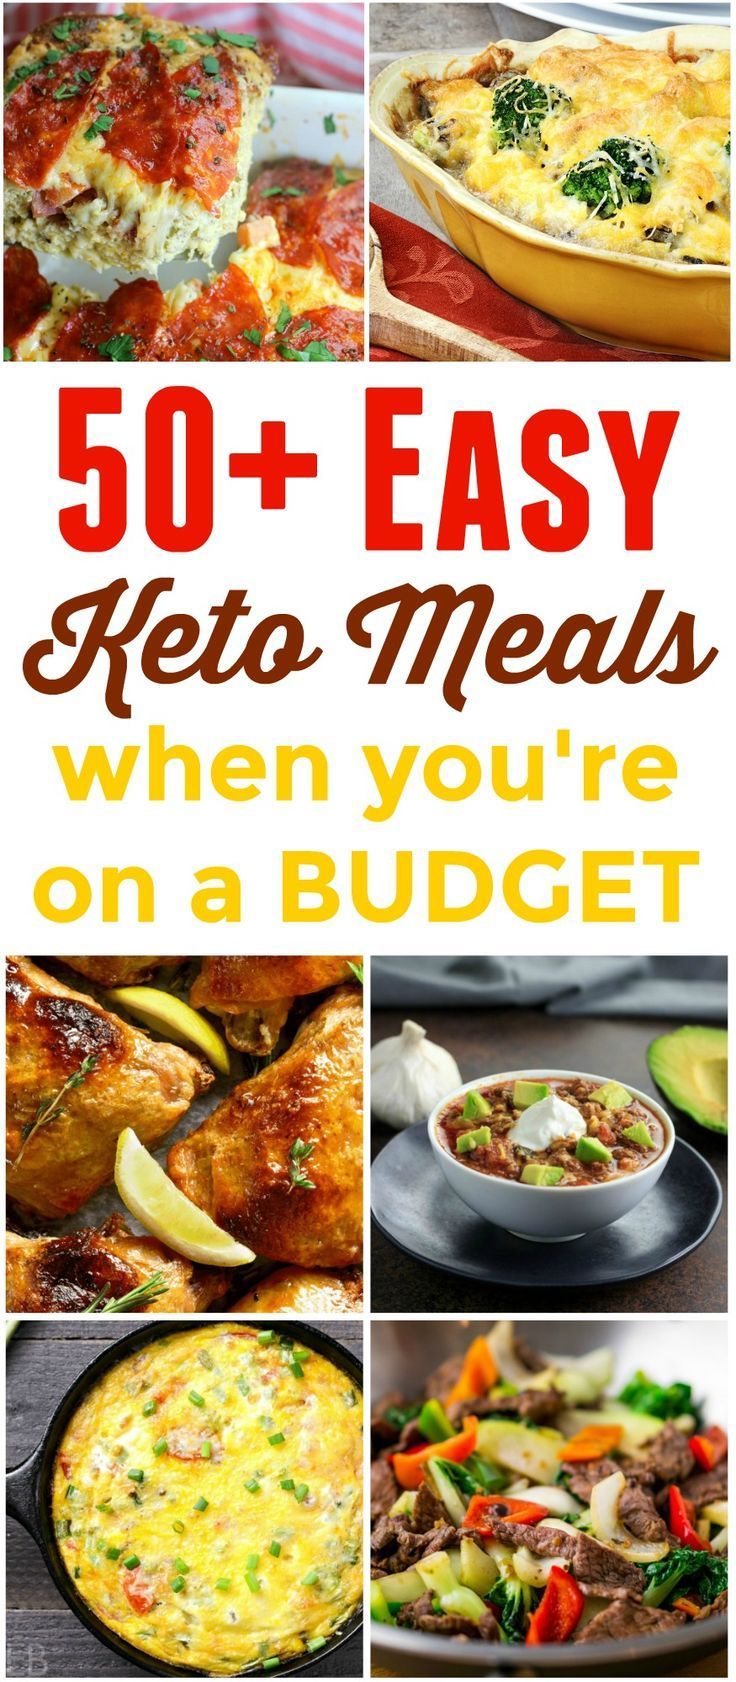 50+ Easy Keto & Low Carb Meals on a Budget {Paleo and GAPS Diet-friendly too + 7 Tips for Quality Food Keto Shopping on a Budget -   21 budget diet meals
 ideas